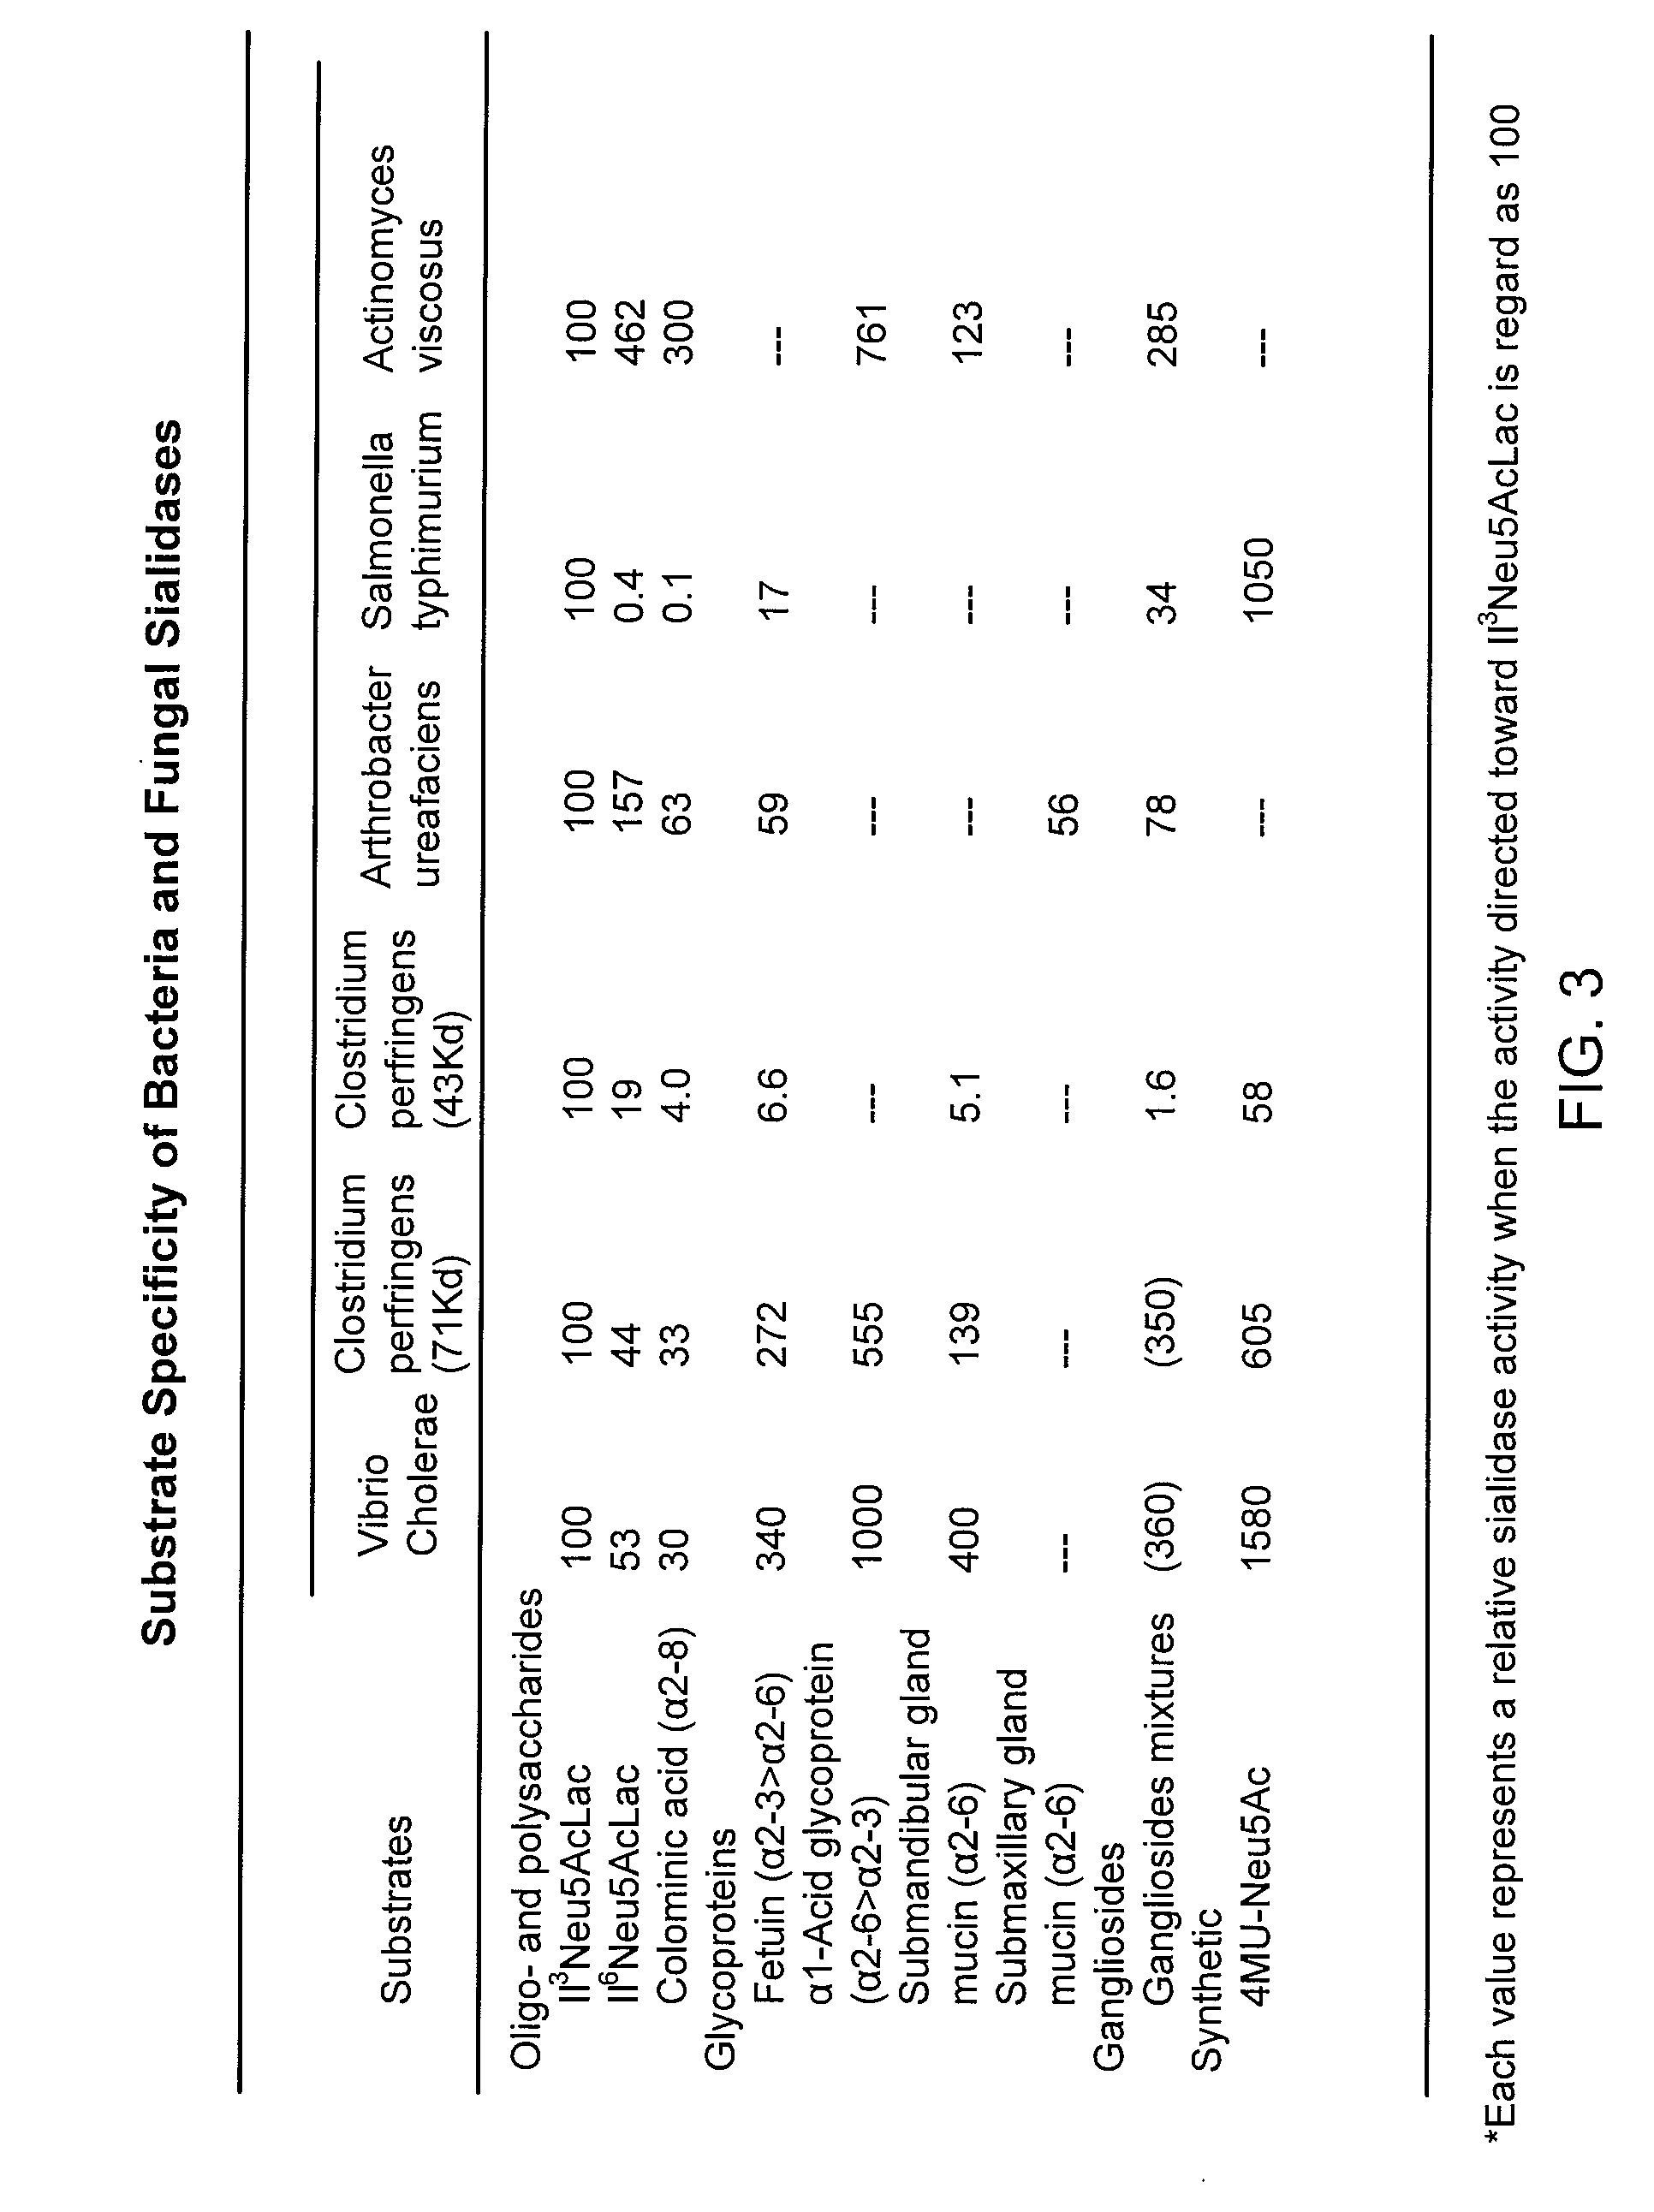 Methods, Compounds, and Compositions for Treatment and Prophylaxis in the Respiratory Tract